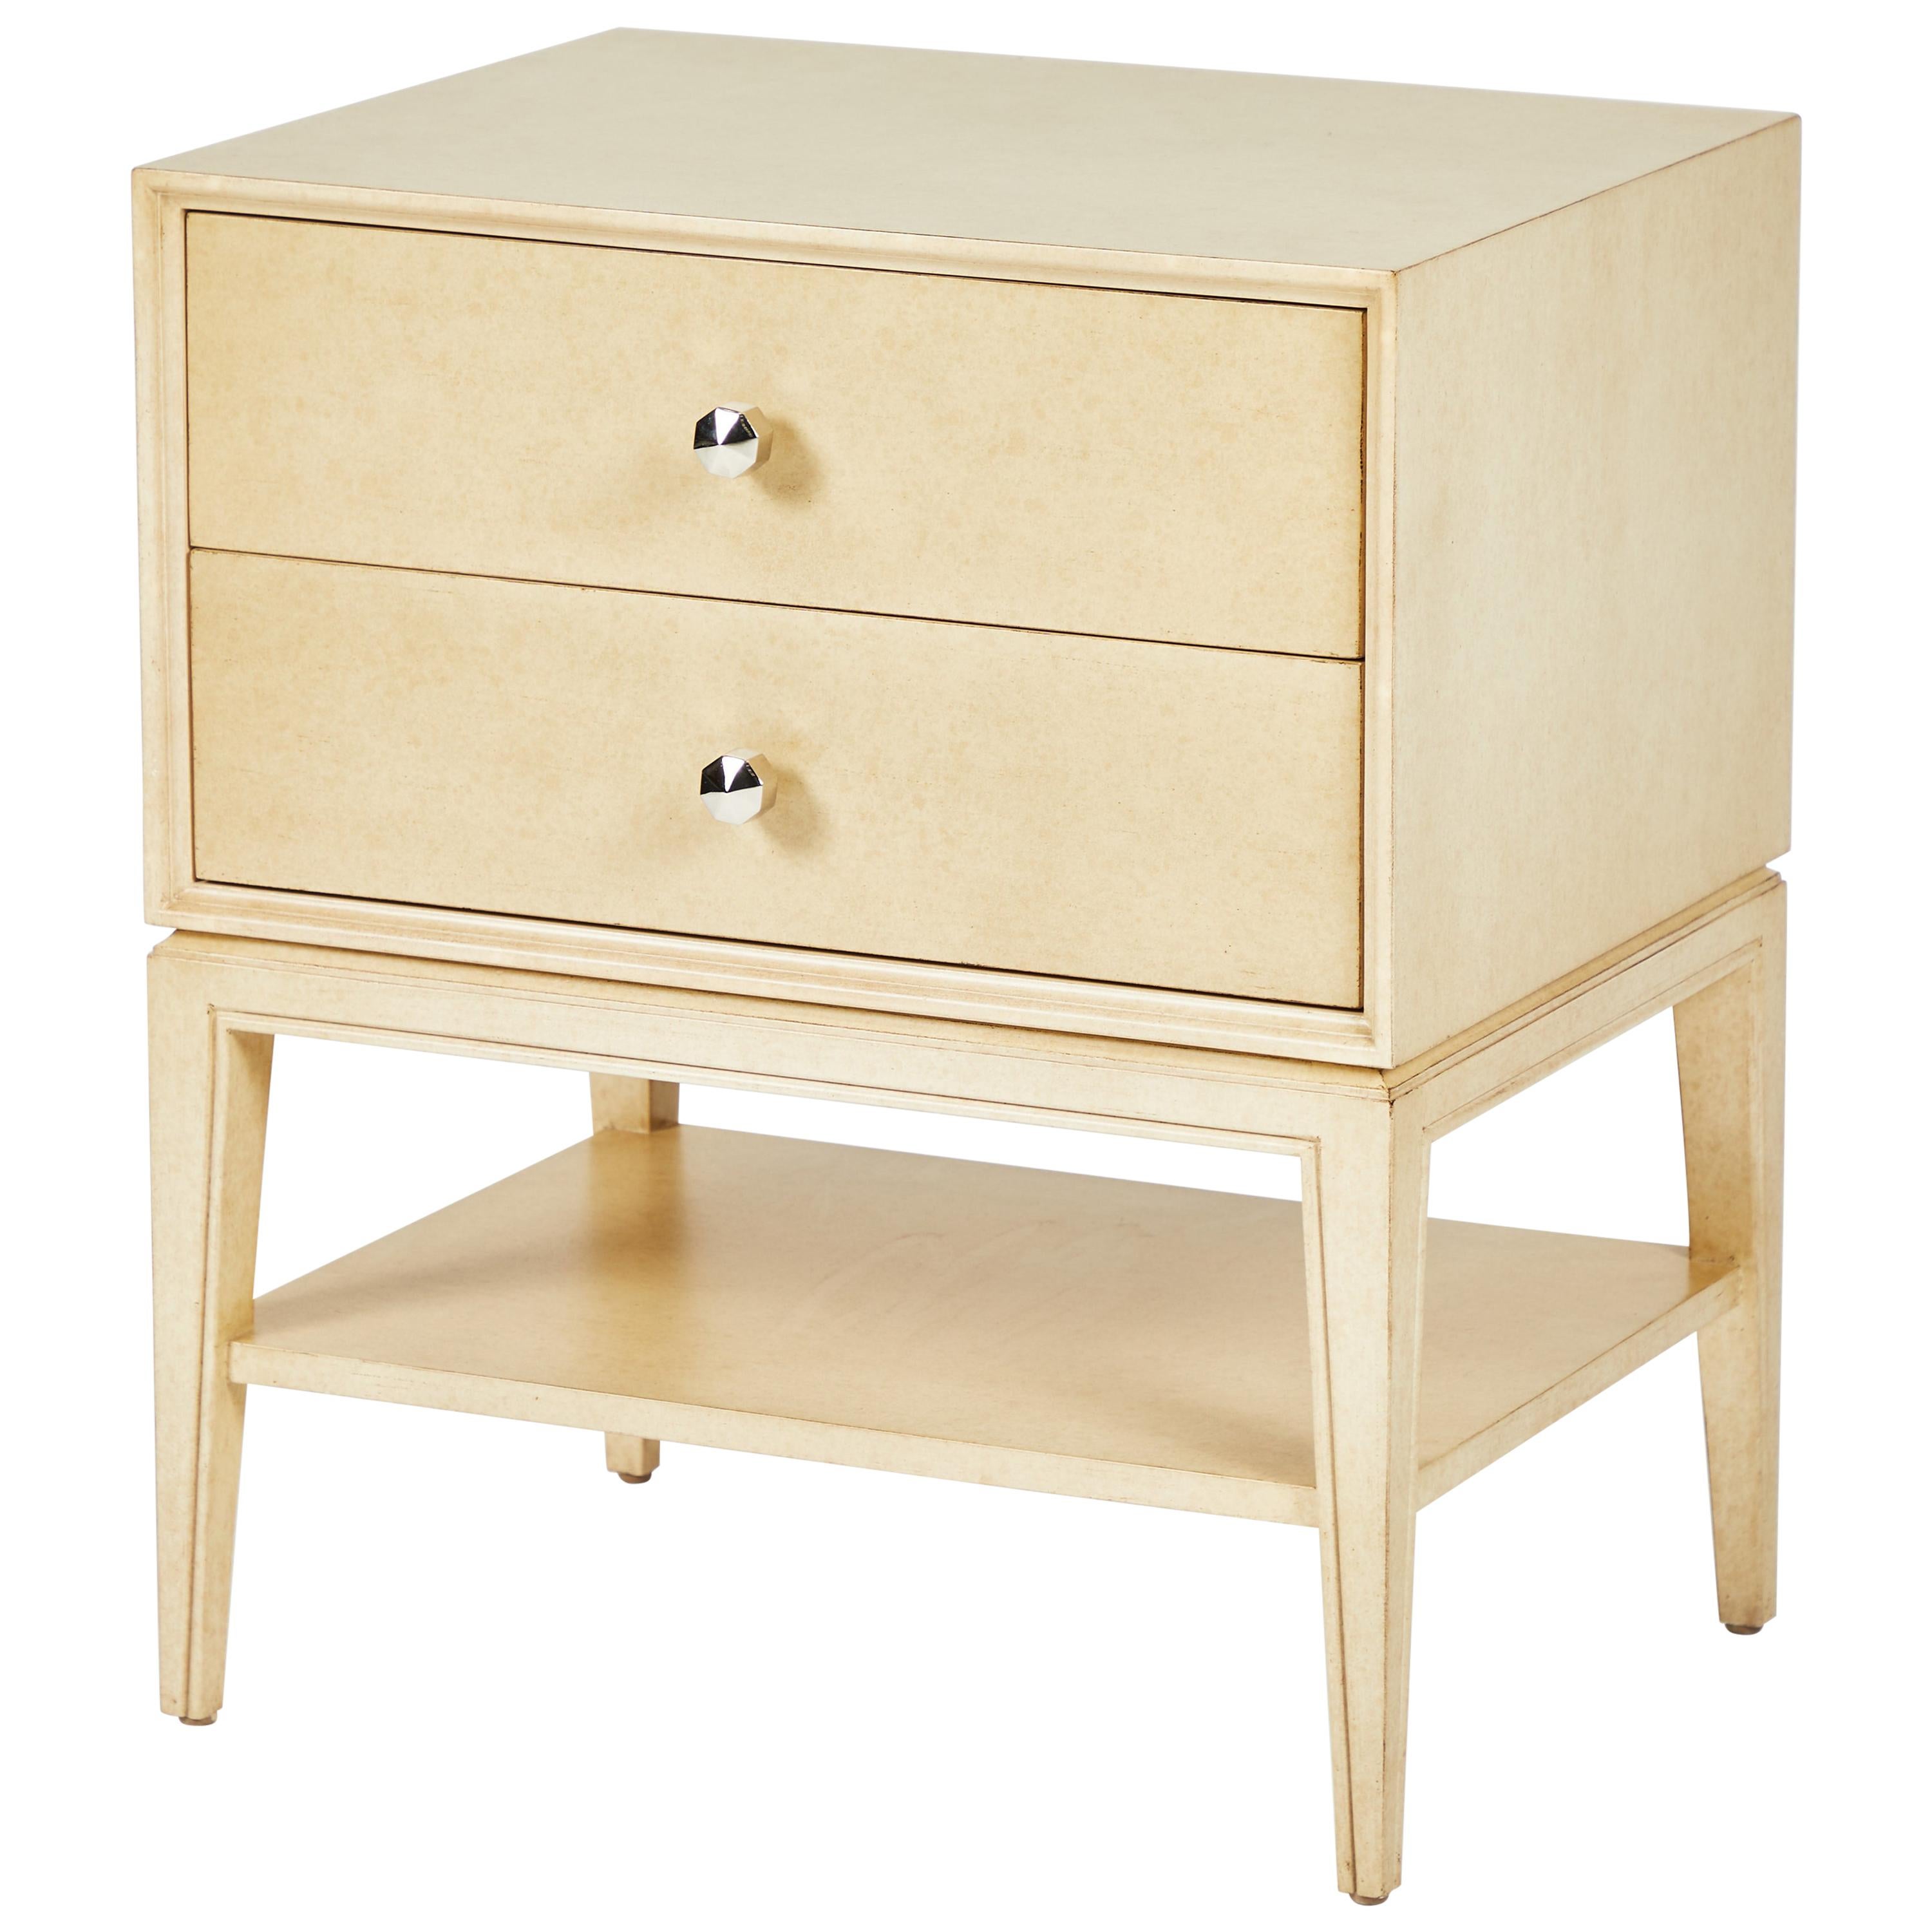 Rectangular Nightstand with 2 Drawers and Open Shelf For Sale